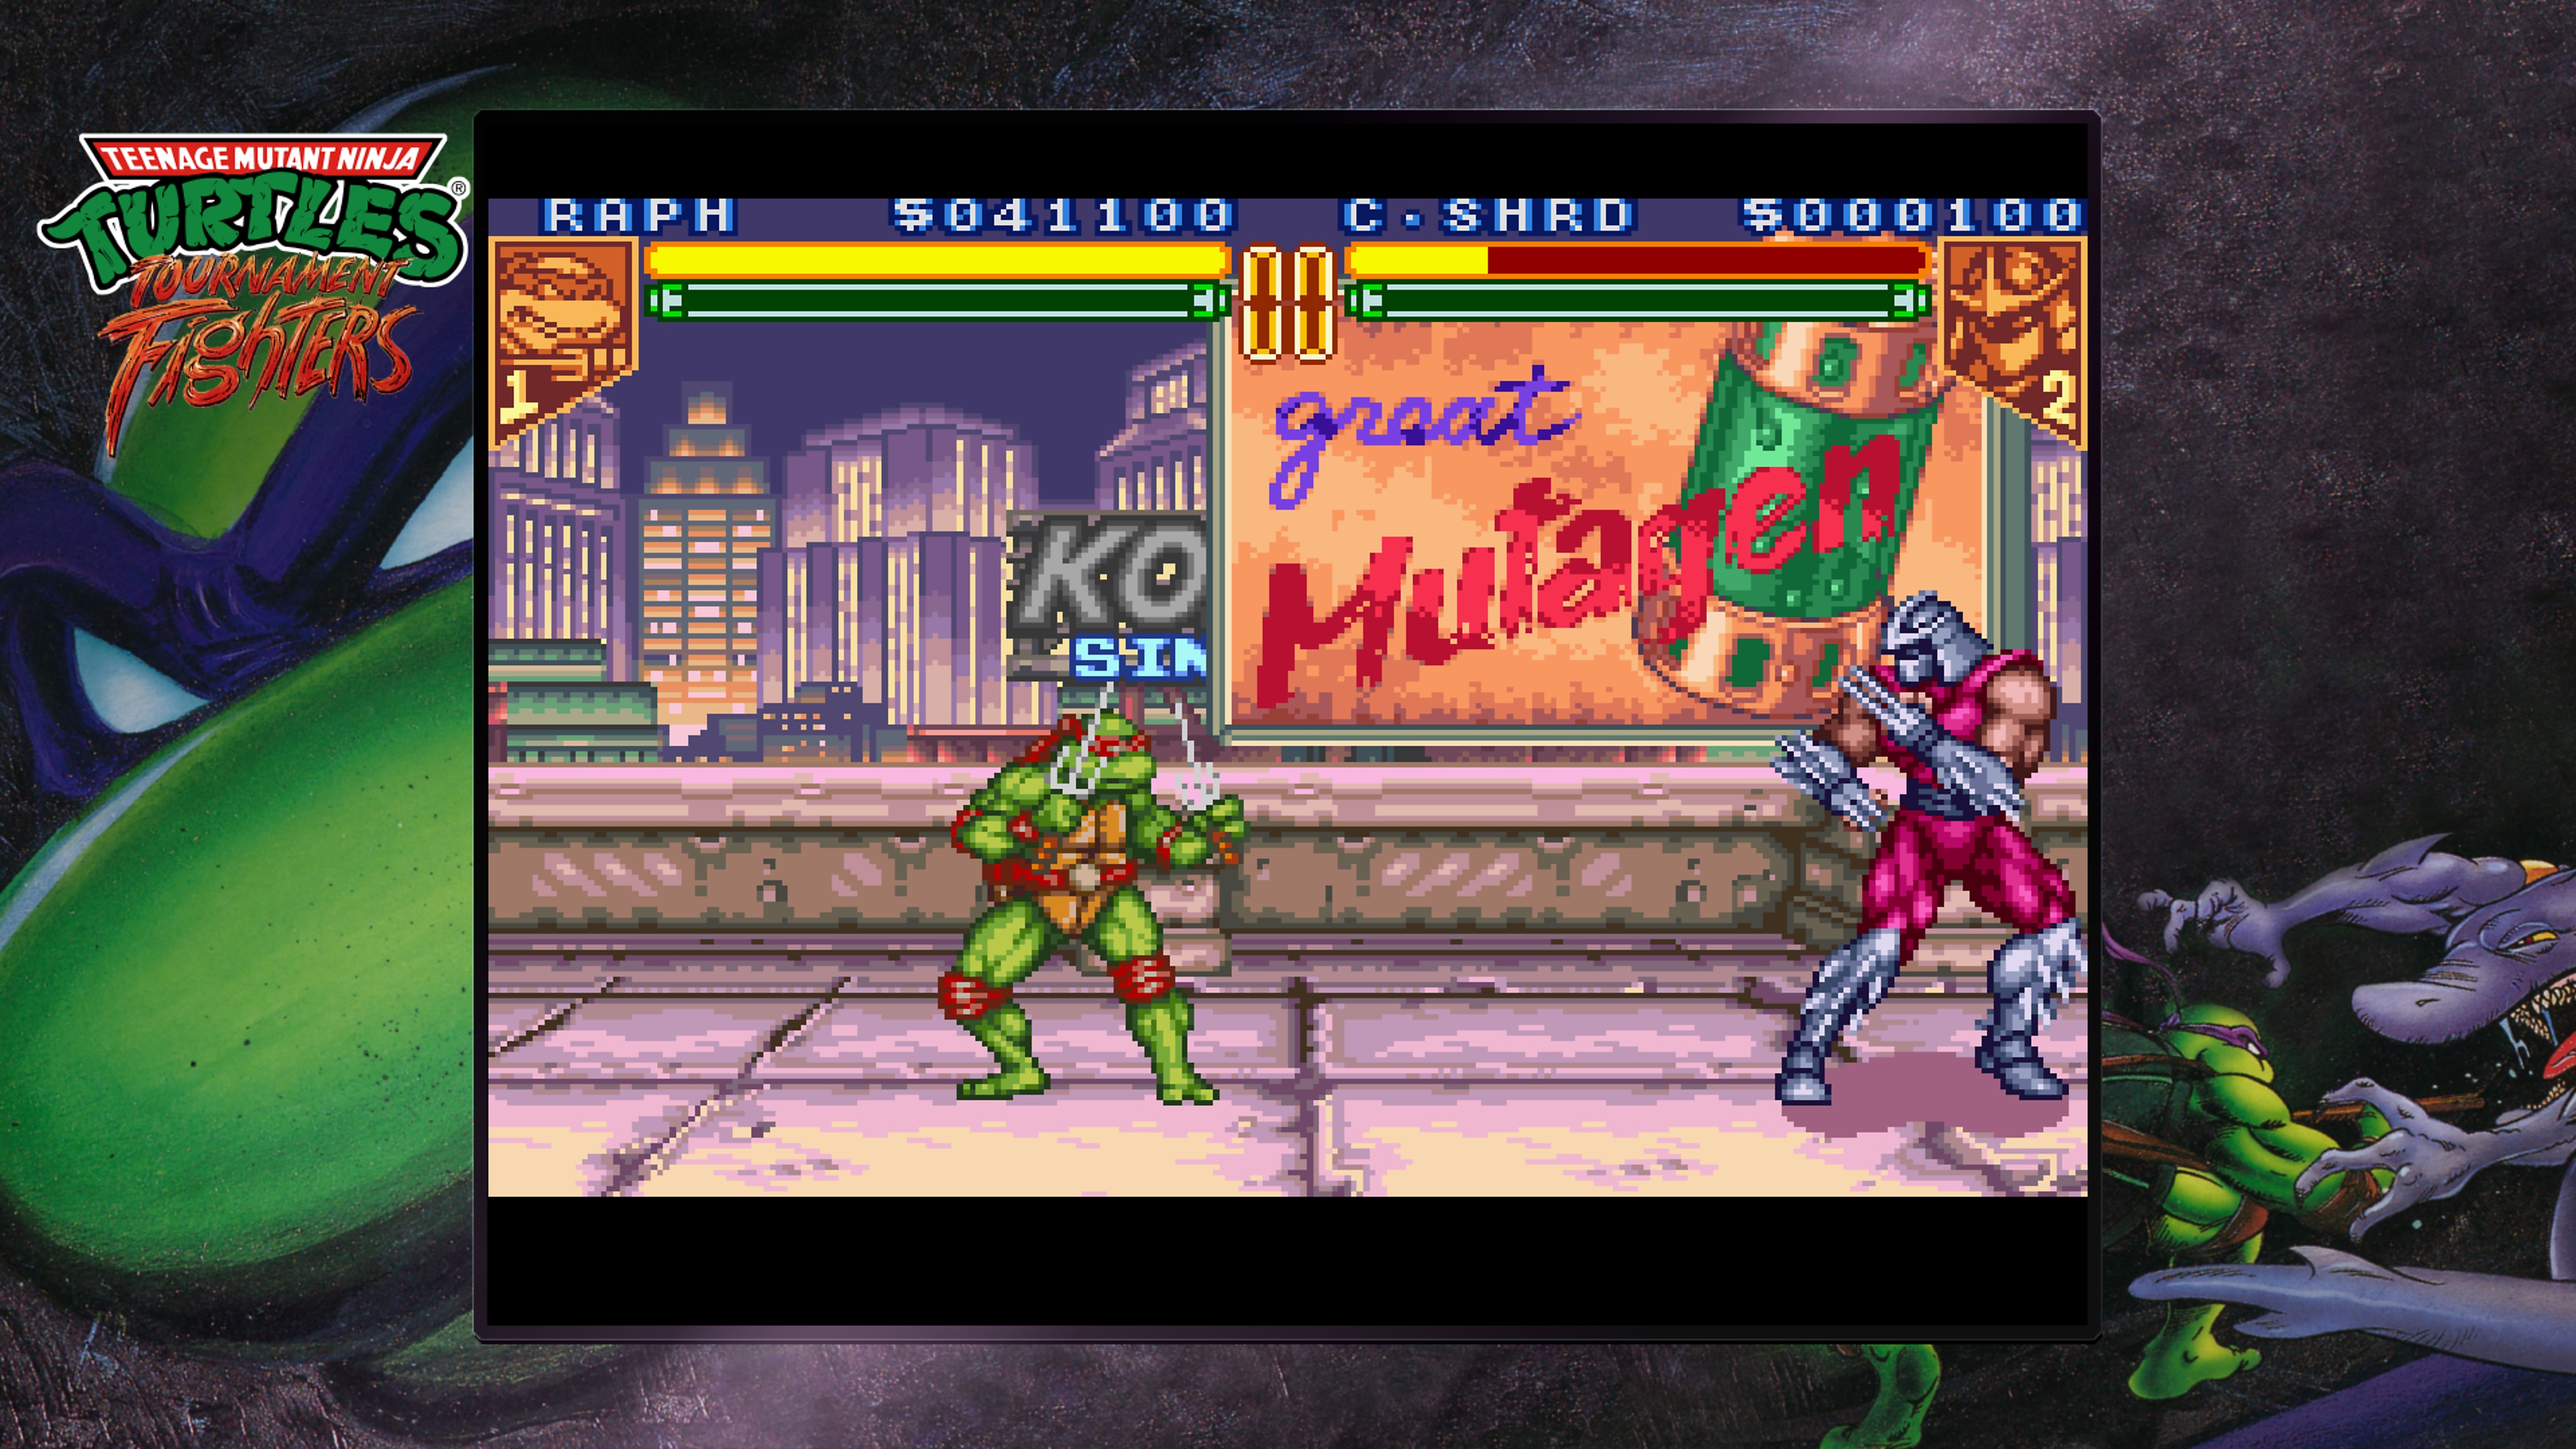 Teenage Mutant Ninja Turtles Collection - Tournament Fighters screenshot showing Raphael fighting Shredder in a rooftop setting